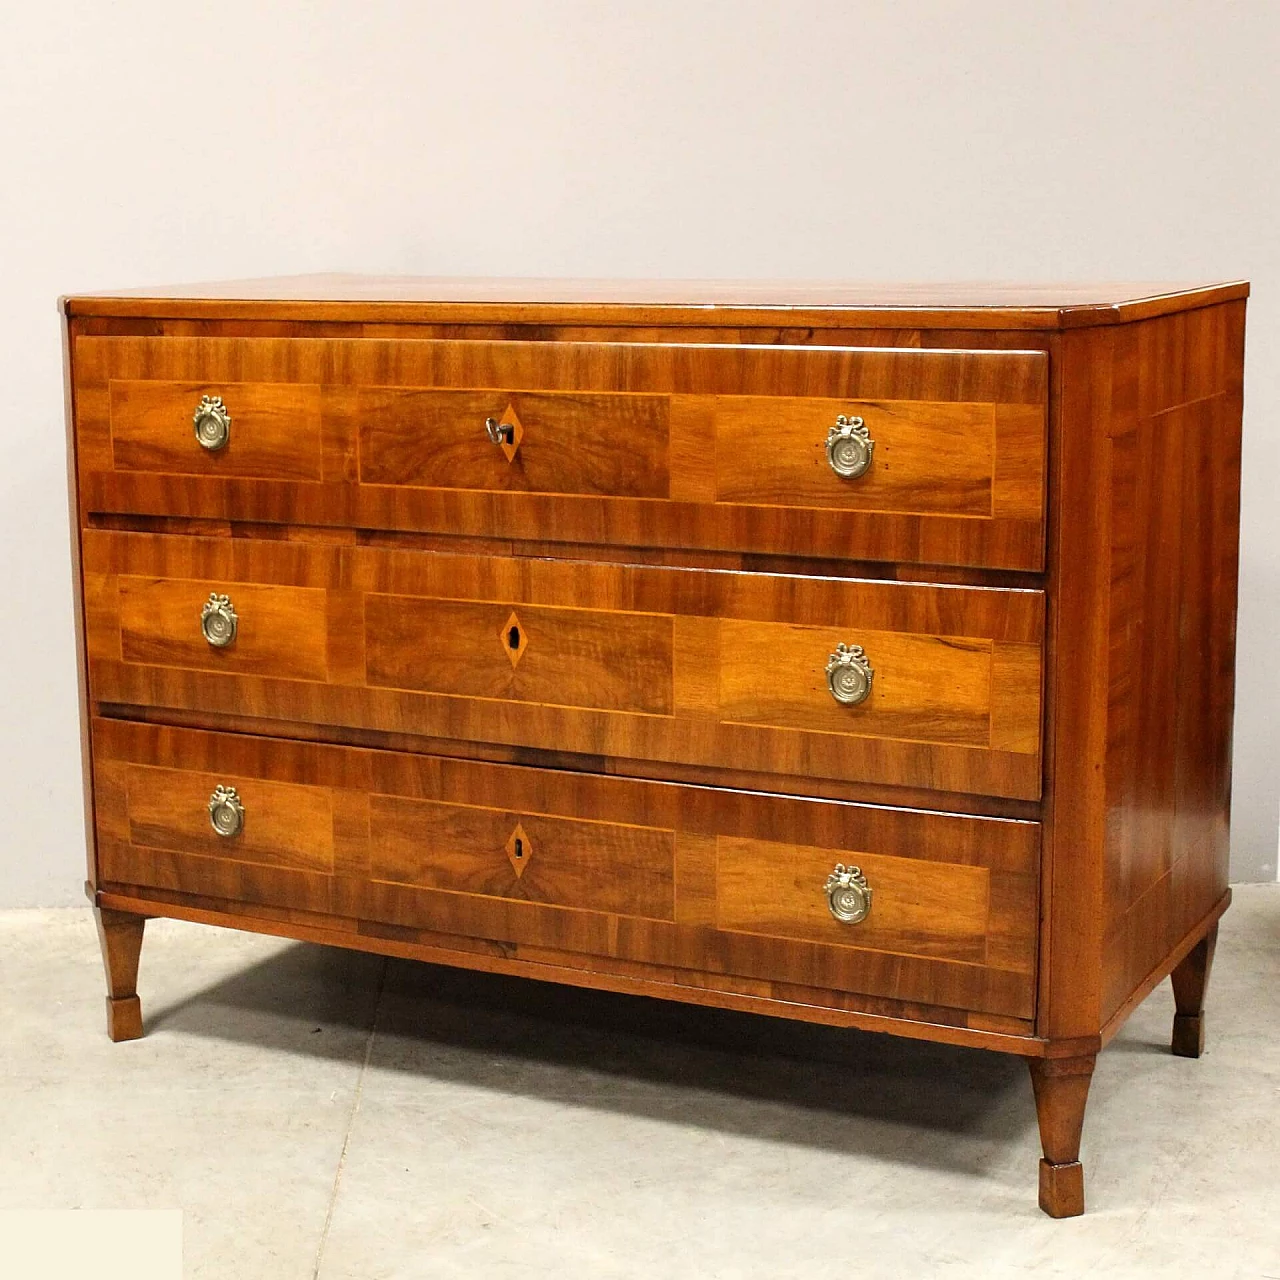 Direttorio chest of drawers in inlaid walnut, second half of the 18th century 9